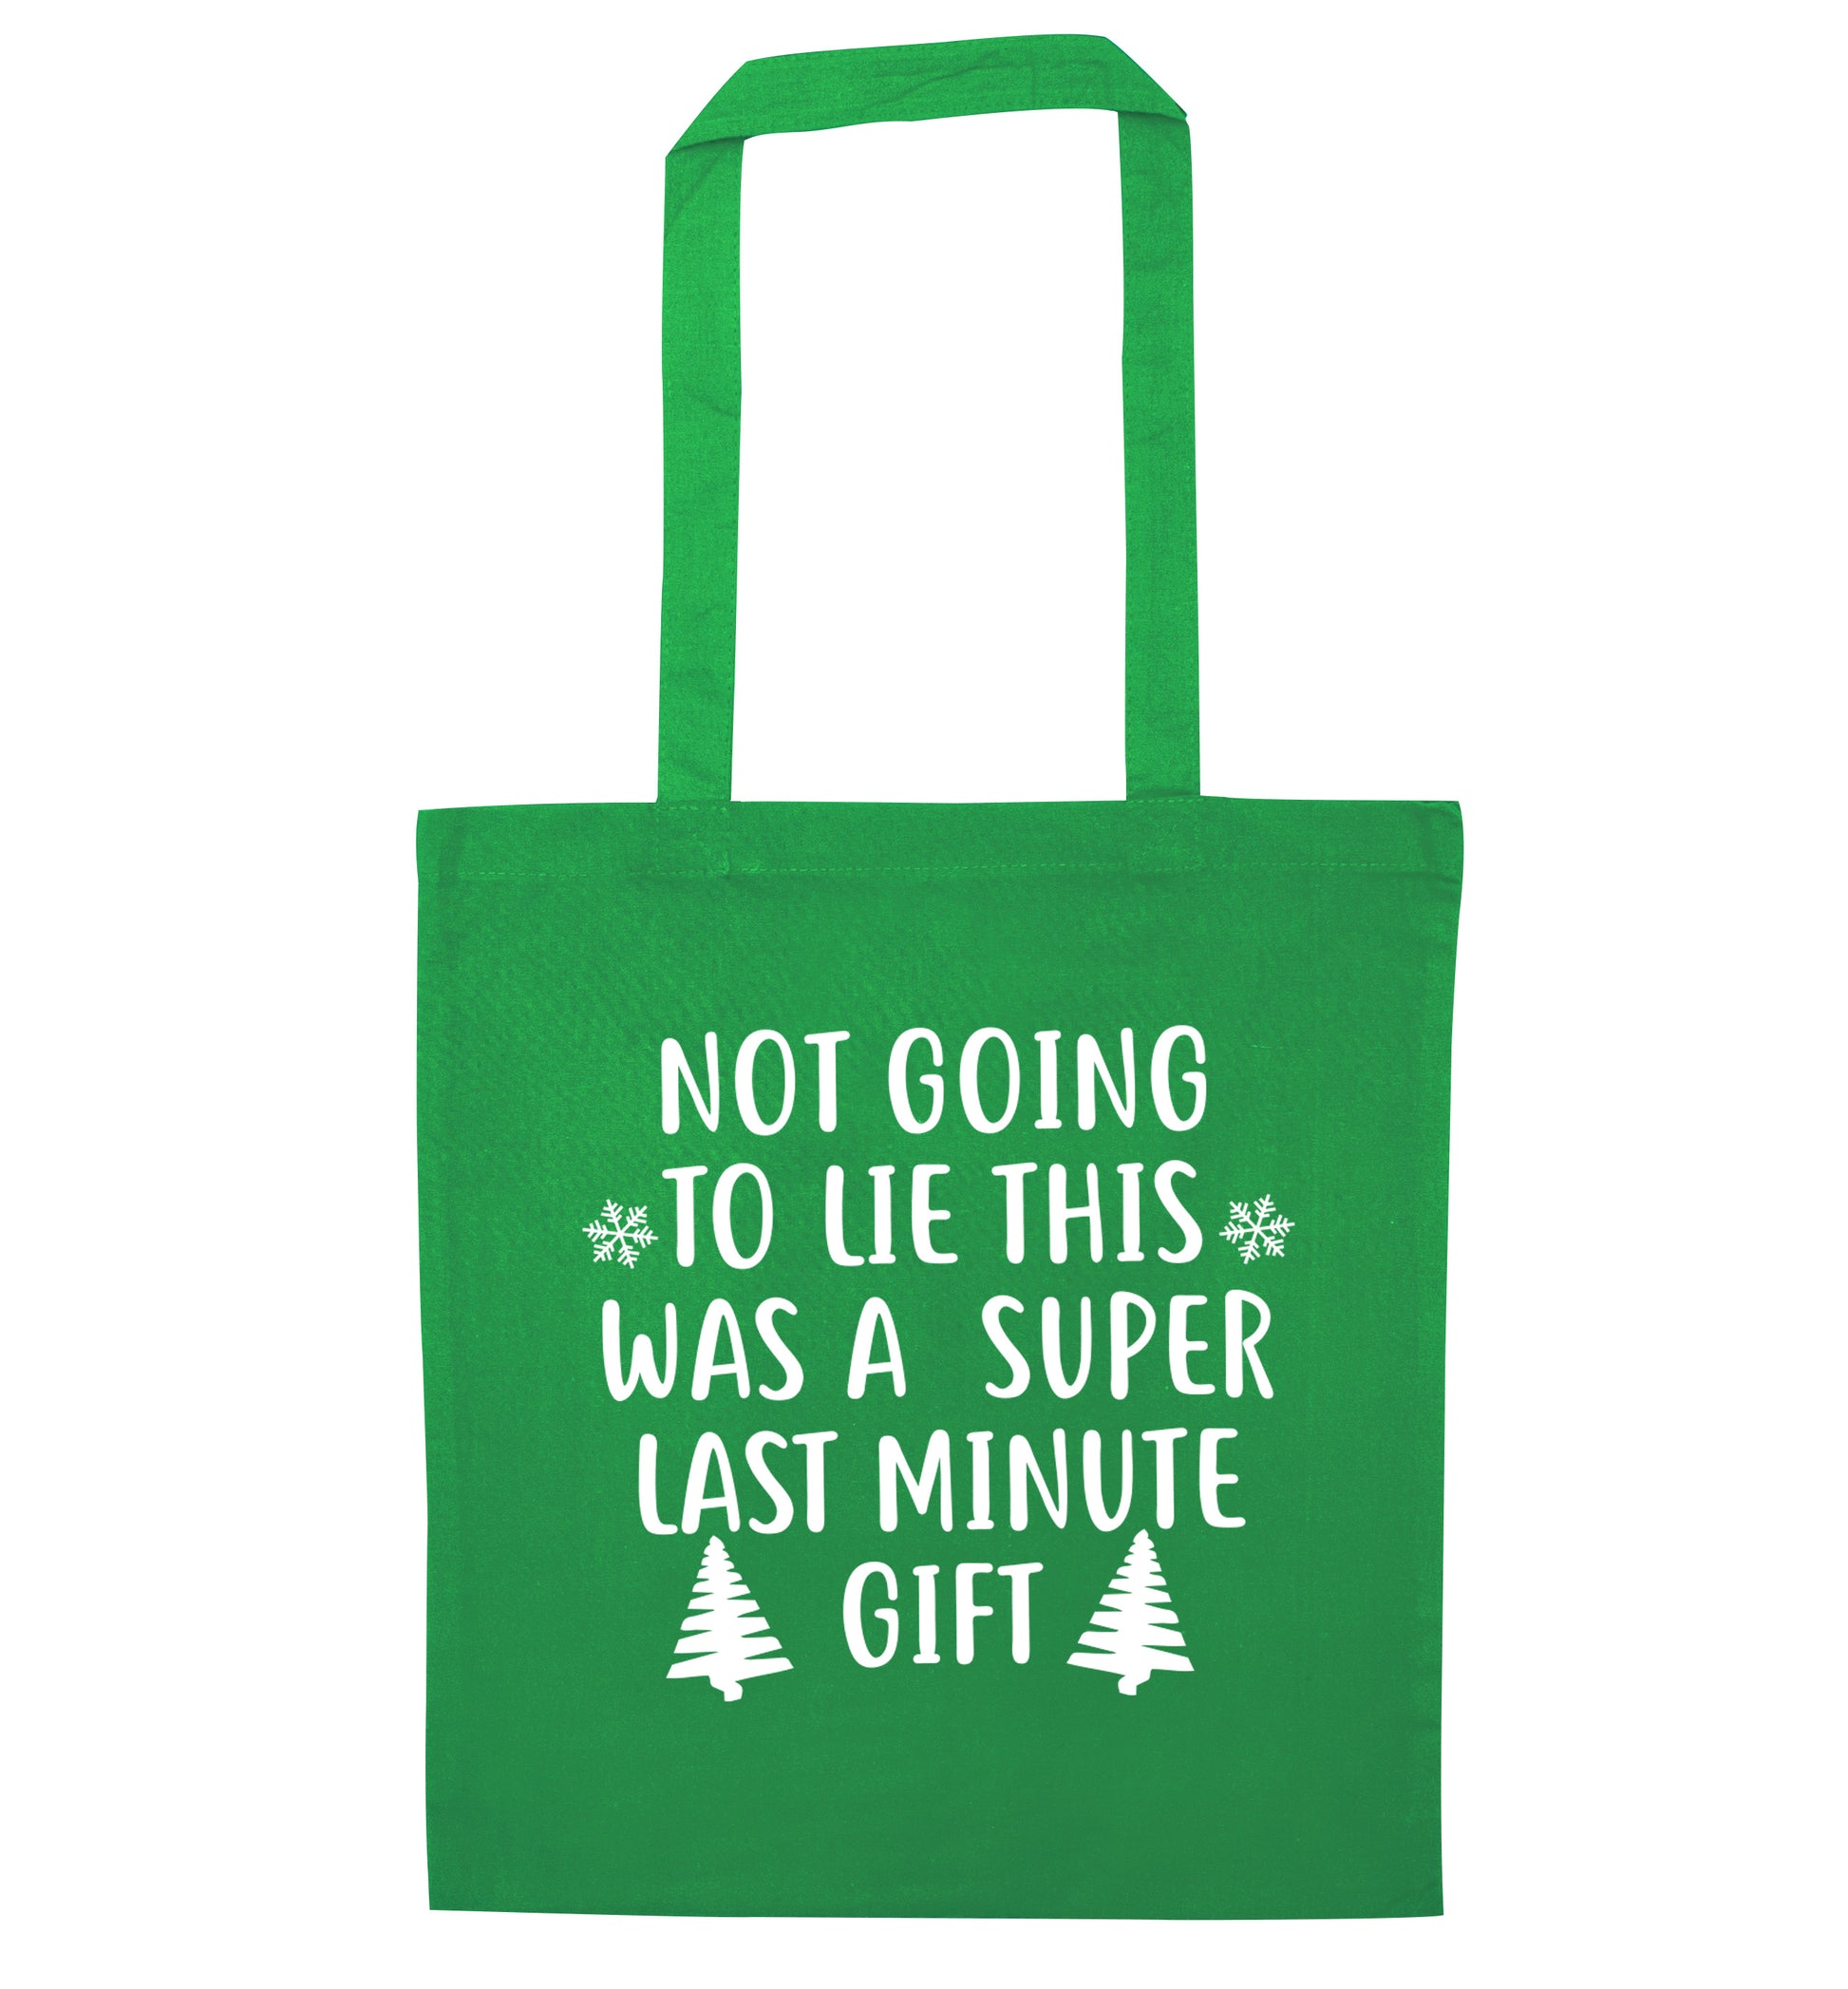 Not going to lie this was a super last minute gift green tote bag